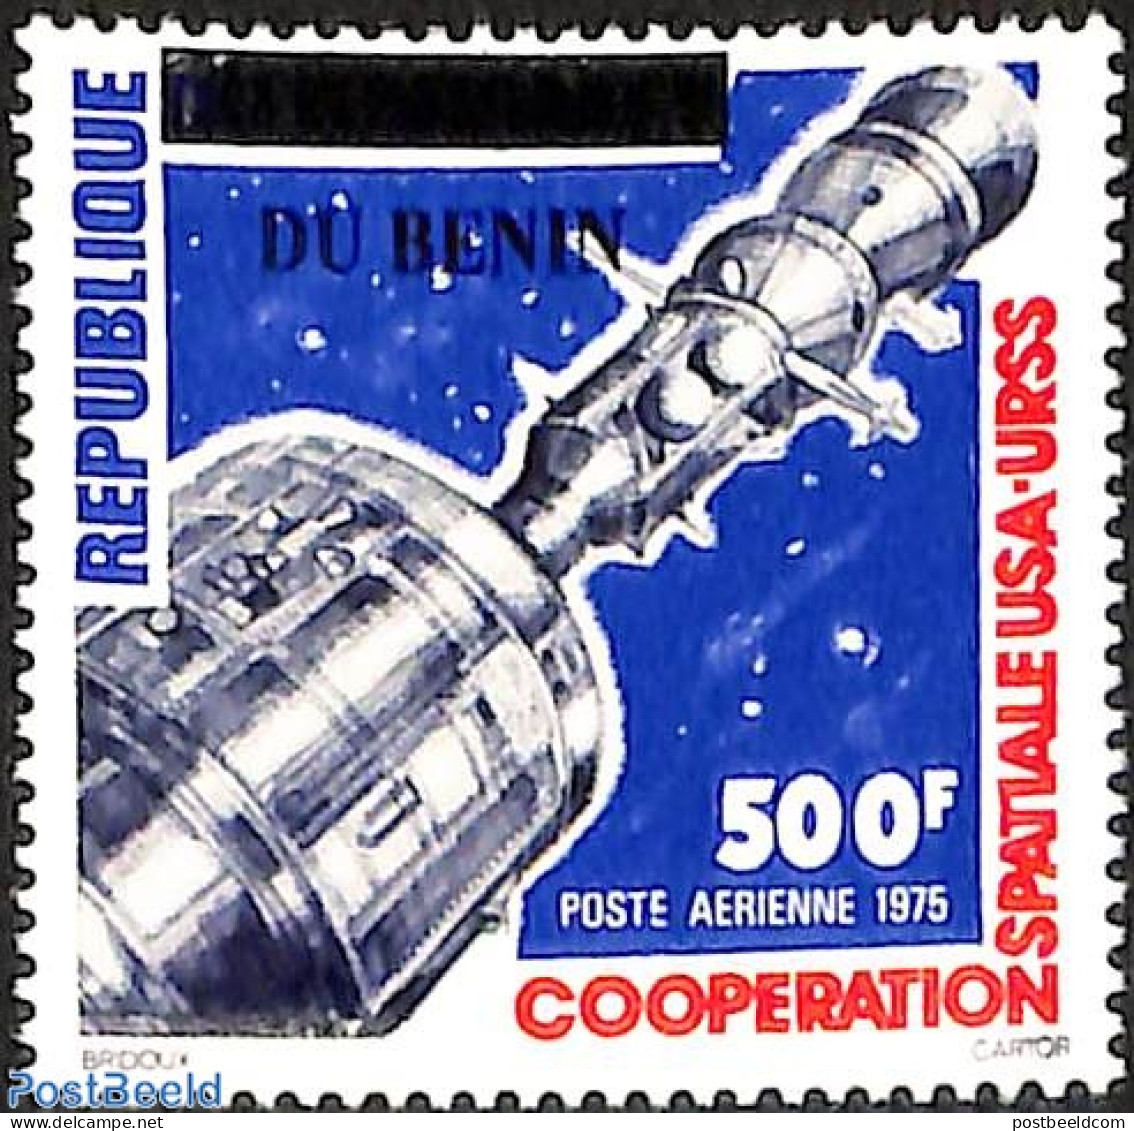 Barbuda 2007 Cooperation USA USSR Space Exploration, Set Of 2 Stamps, Overprint, Mint NH, Transport - Various - Space .. - Erreurs Sur Timbres